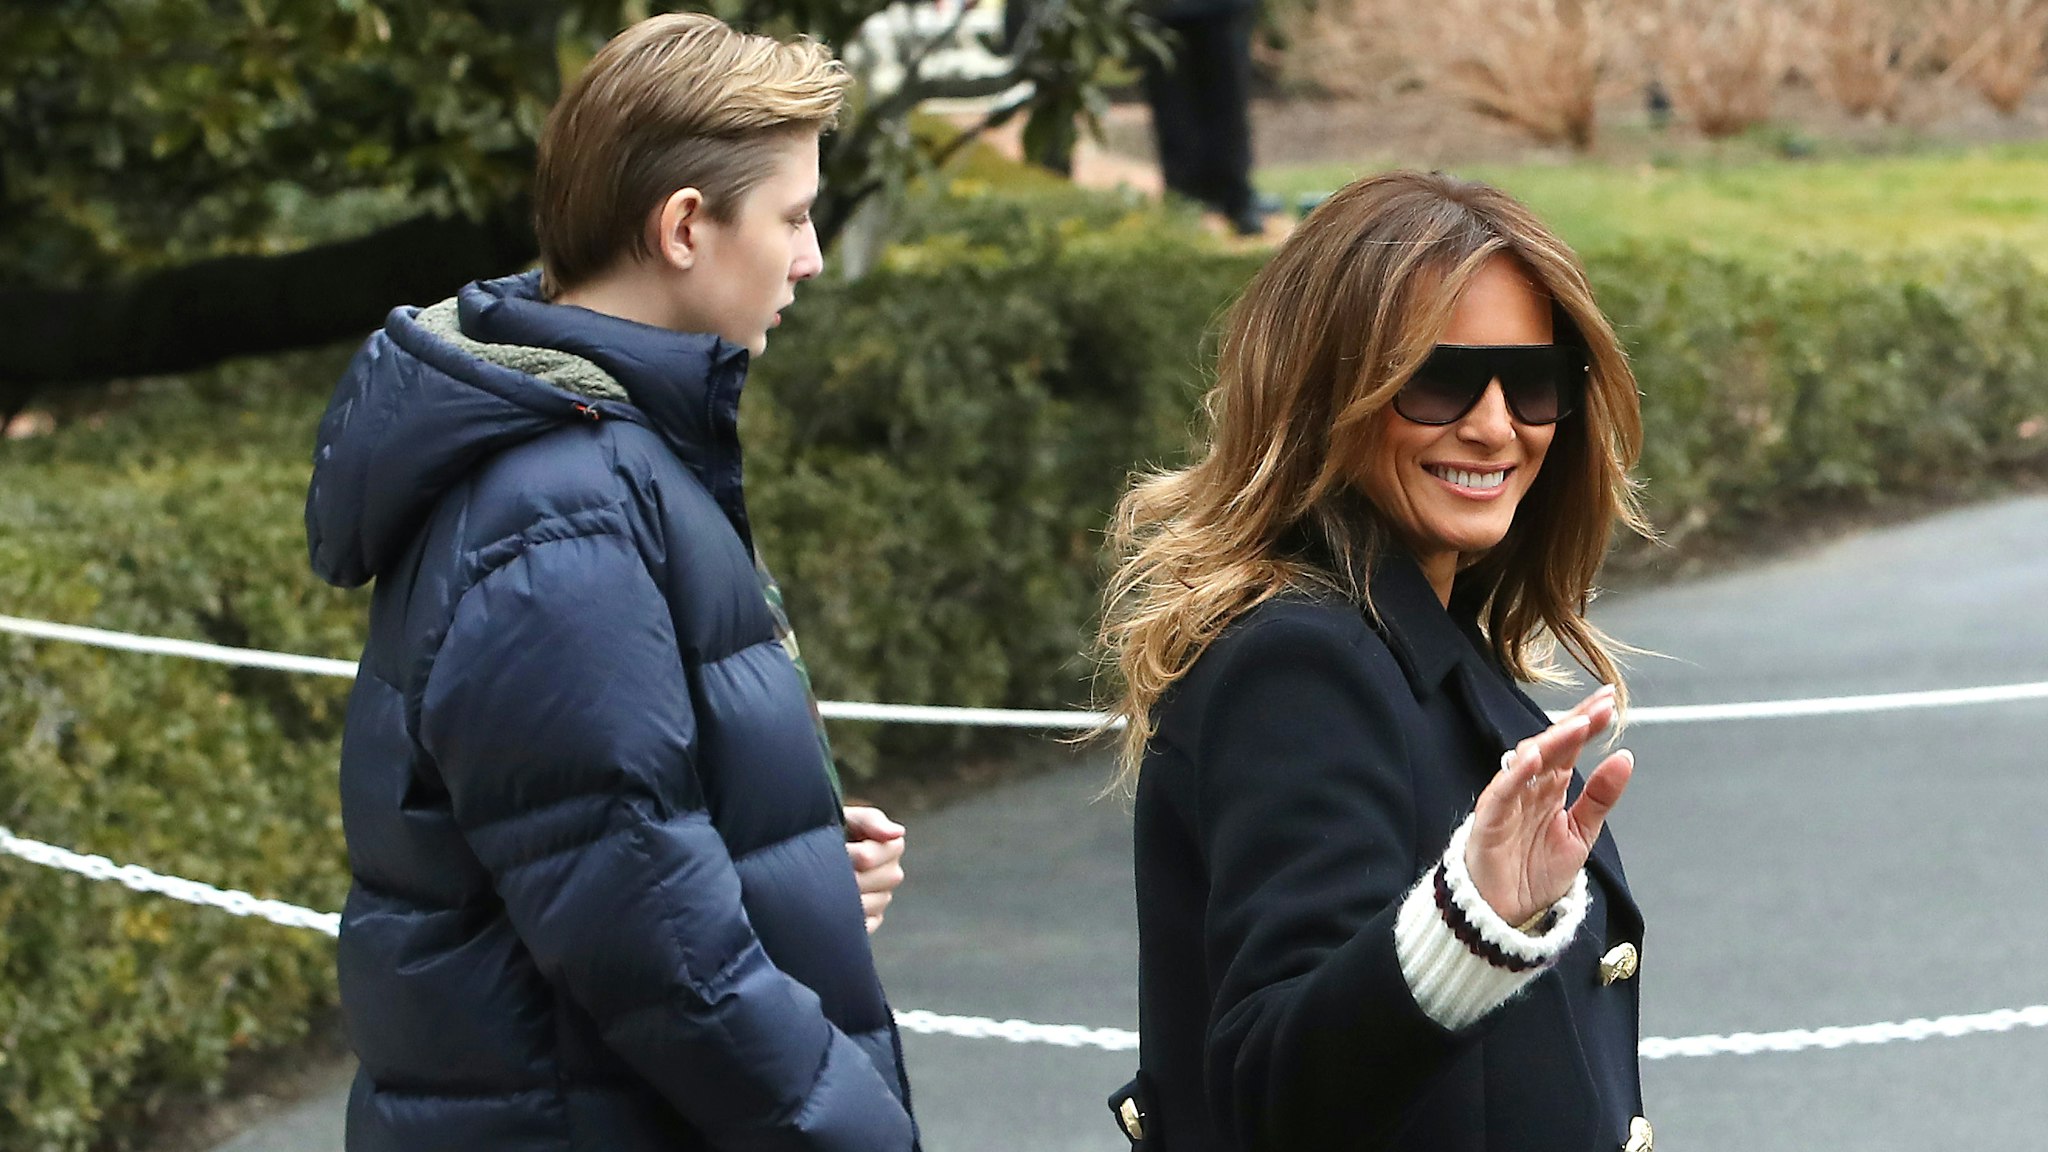 WASHINGTON, DC - MARCH 08: First Lady Melania Trump walks with her son Barron Trump as they depart with U.S. President Donald Trump, from the South Lawn of the White House on March 8, 2019 in Washington, DC. President Trump is headed to Alabama to survey tornado damage.